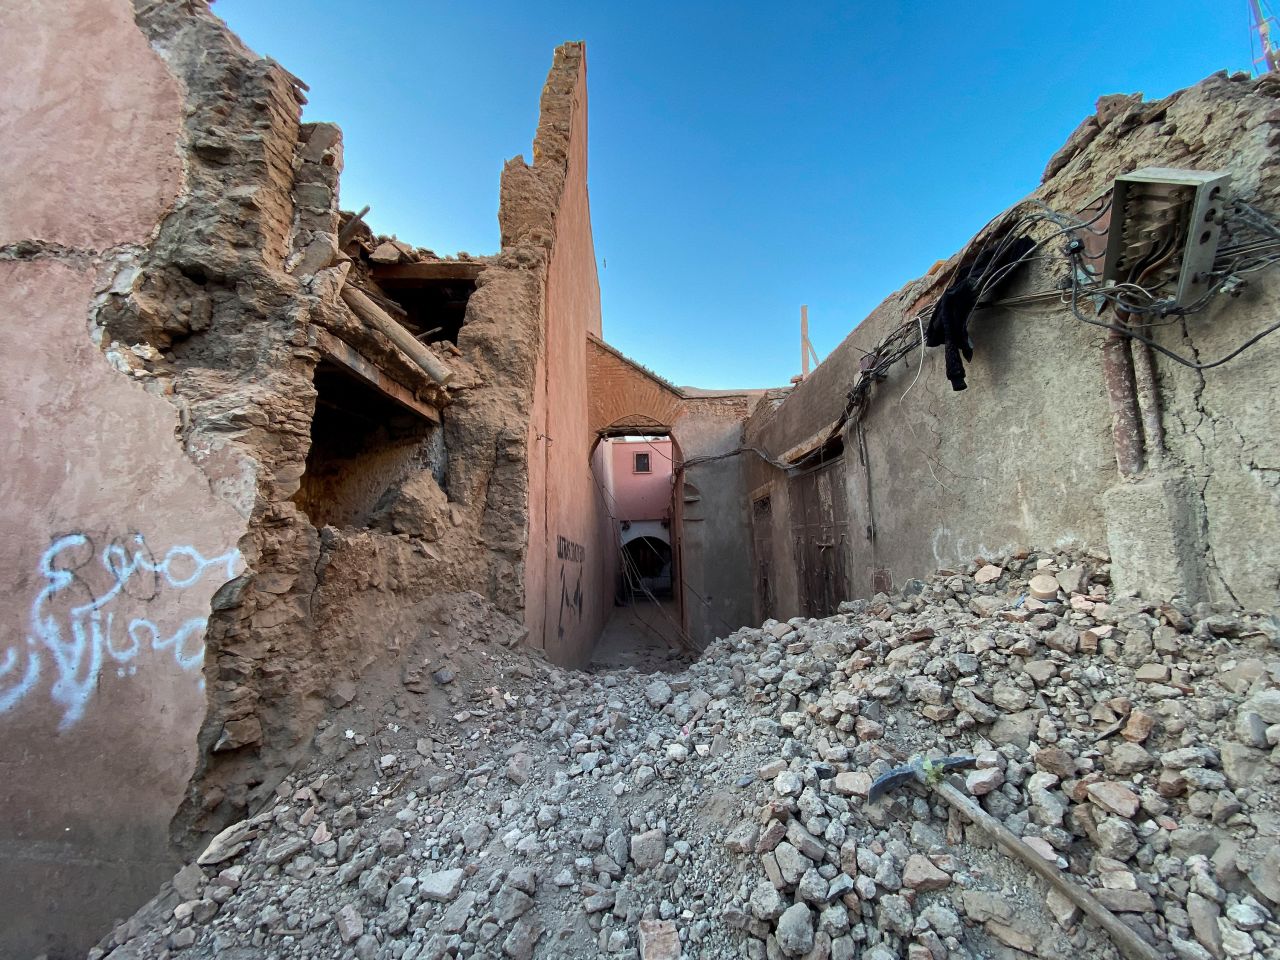 A general view of damage in the historic city of Marrakech, Morocco.